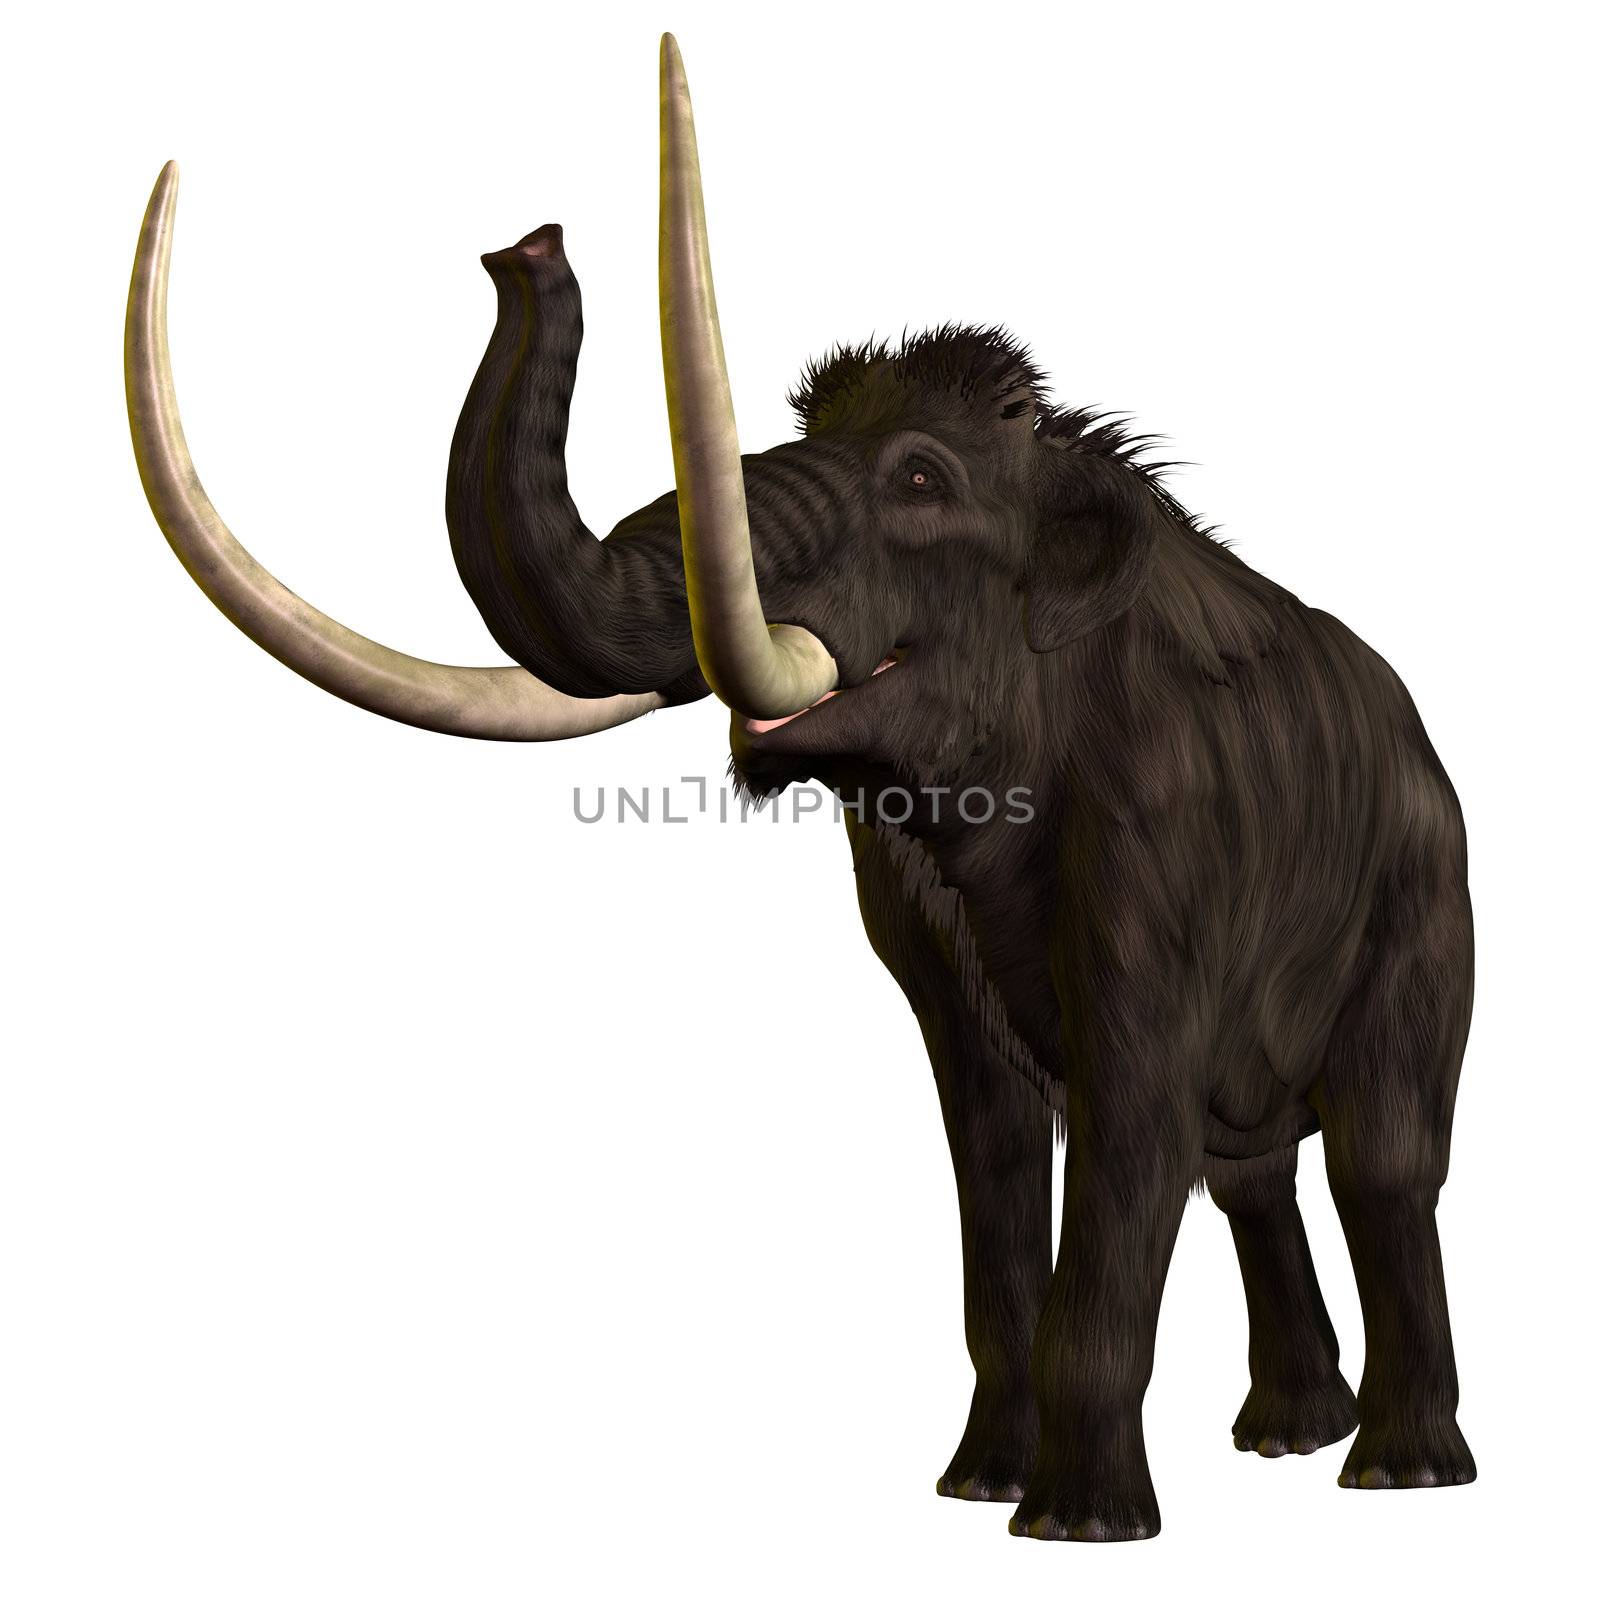 The Woolly Mammoth is an extinct elephant like giant from the Pleistocene Period of Earths history. Its fossils have been found in Siberia, North America and northern Eurasia.